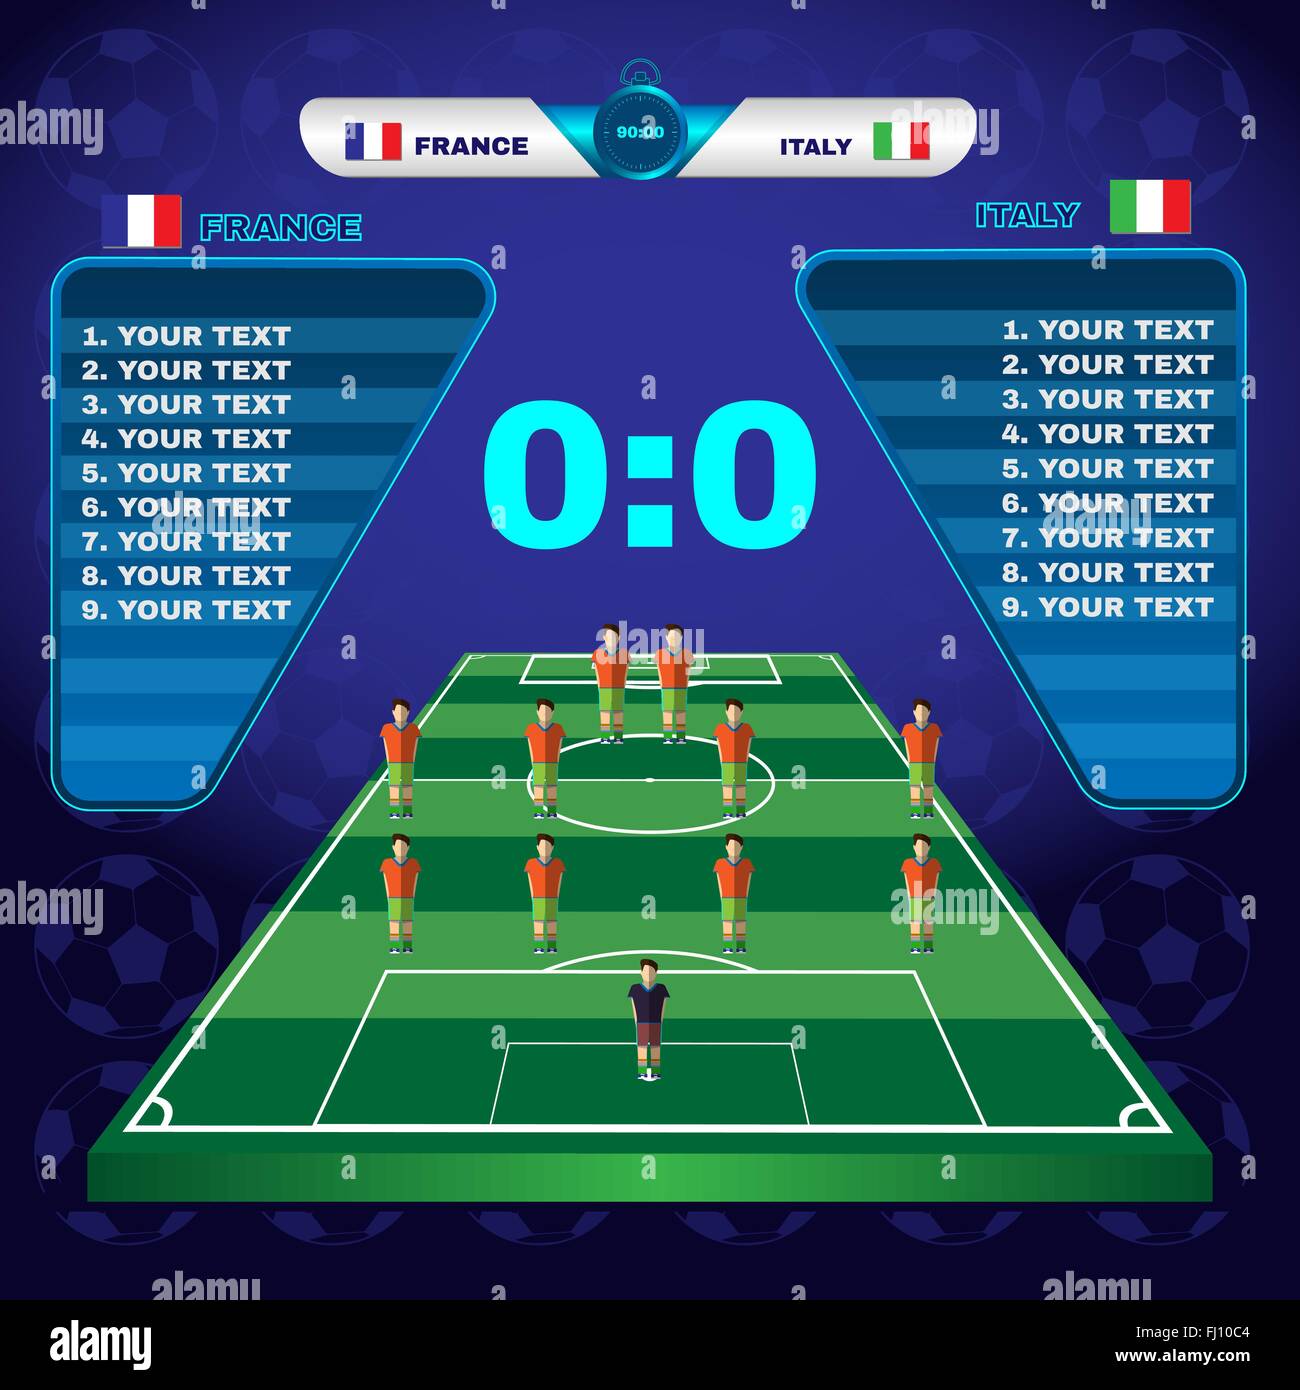 Football Soccer Match Statistics. Scoreboard with players and match